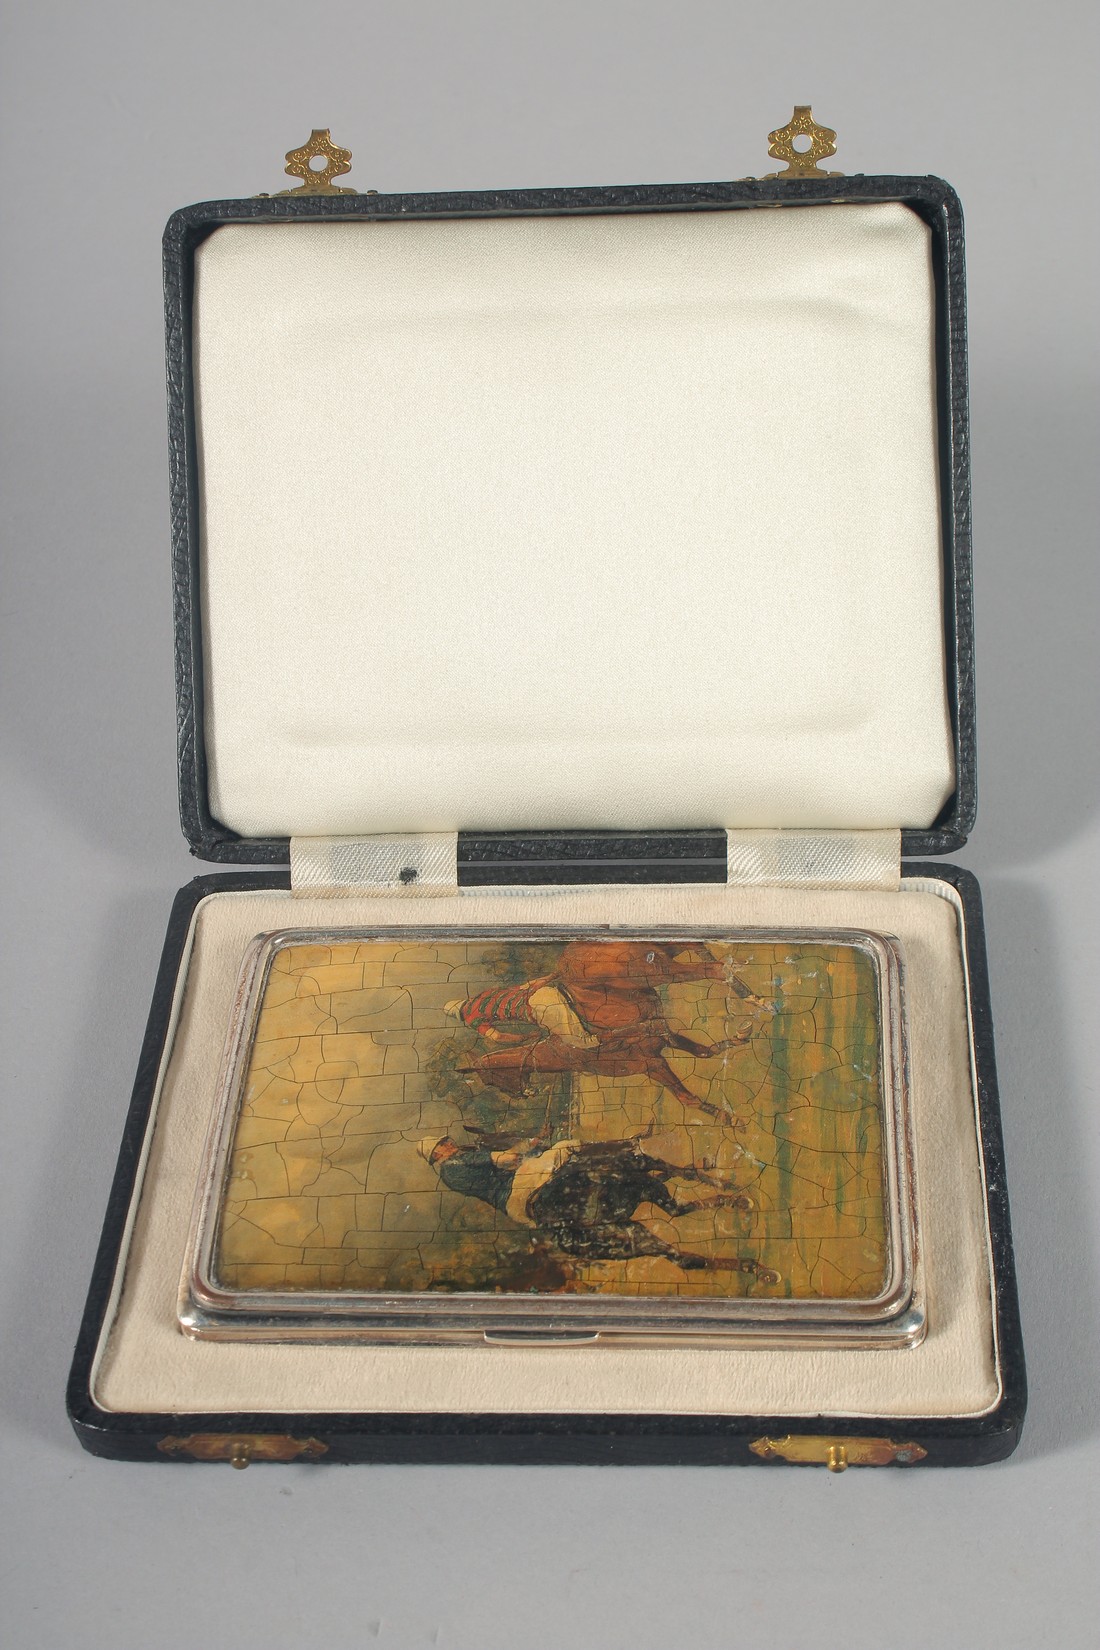 A SILVER CIGARETTE CASE, Chester 1934, the front and back decorated with scenes of a polo match, - Image 8 of 8